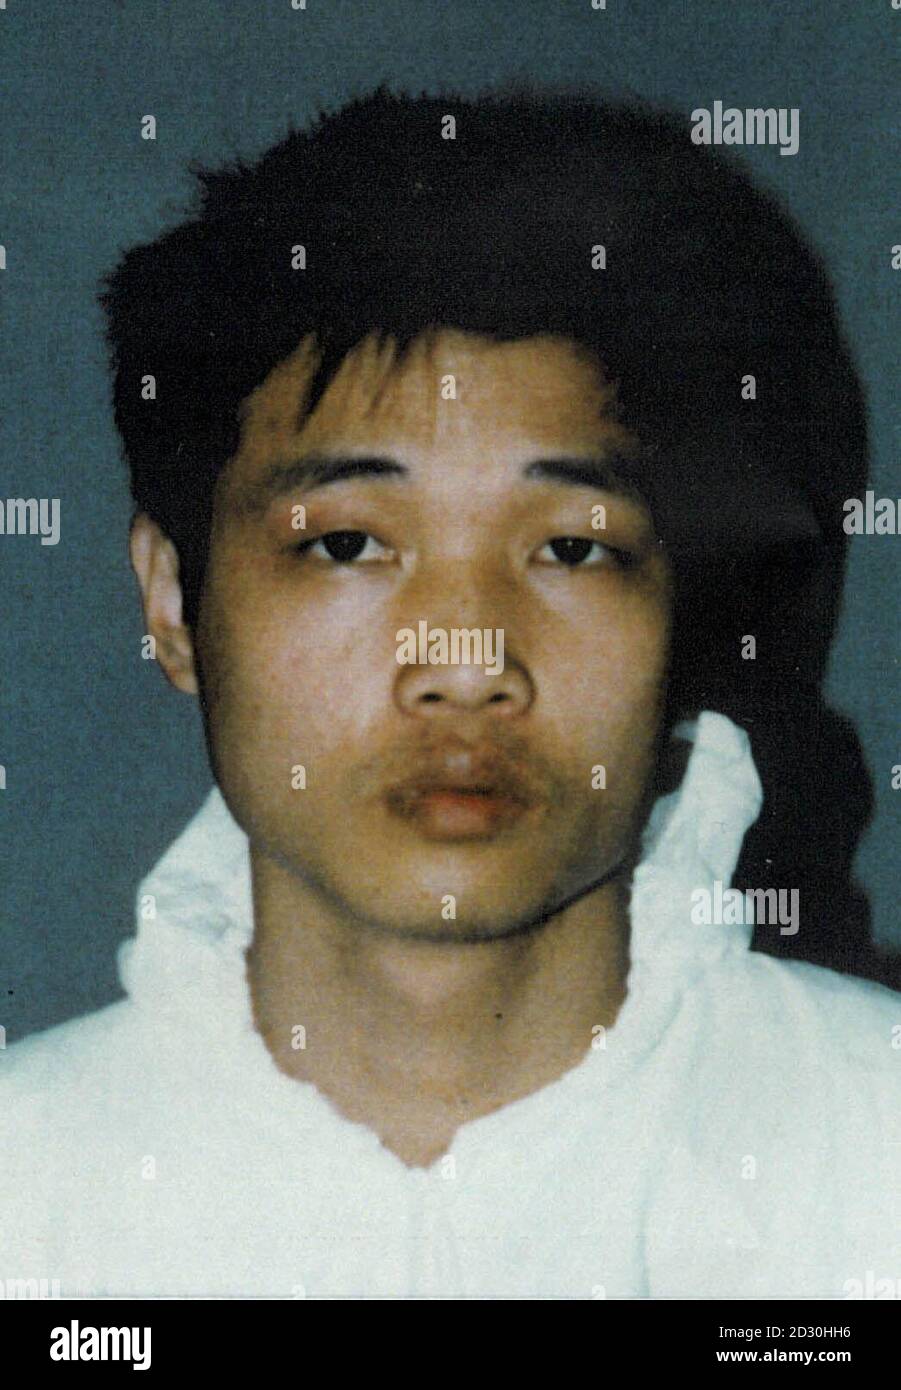 Police issued photo of Shun Chiu Kong, jailed for 7 years at Kingston Crown Court, resulting from a police action that smashed a lucrative people smuggling and extortion racket by a ruthless gang known as Snakeheads who kidnapped illegal immigrants. * They then demanded ransoms of tens of thousands of pounds from poor relatives in China. The Metropolitan Police claimed a major victory against the gangs at the end of a series of trials which have led to the conviction of 19 Chinese men and women. Stock Photo